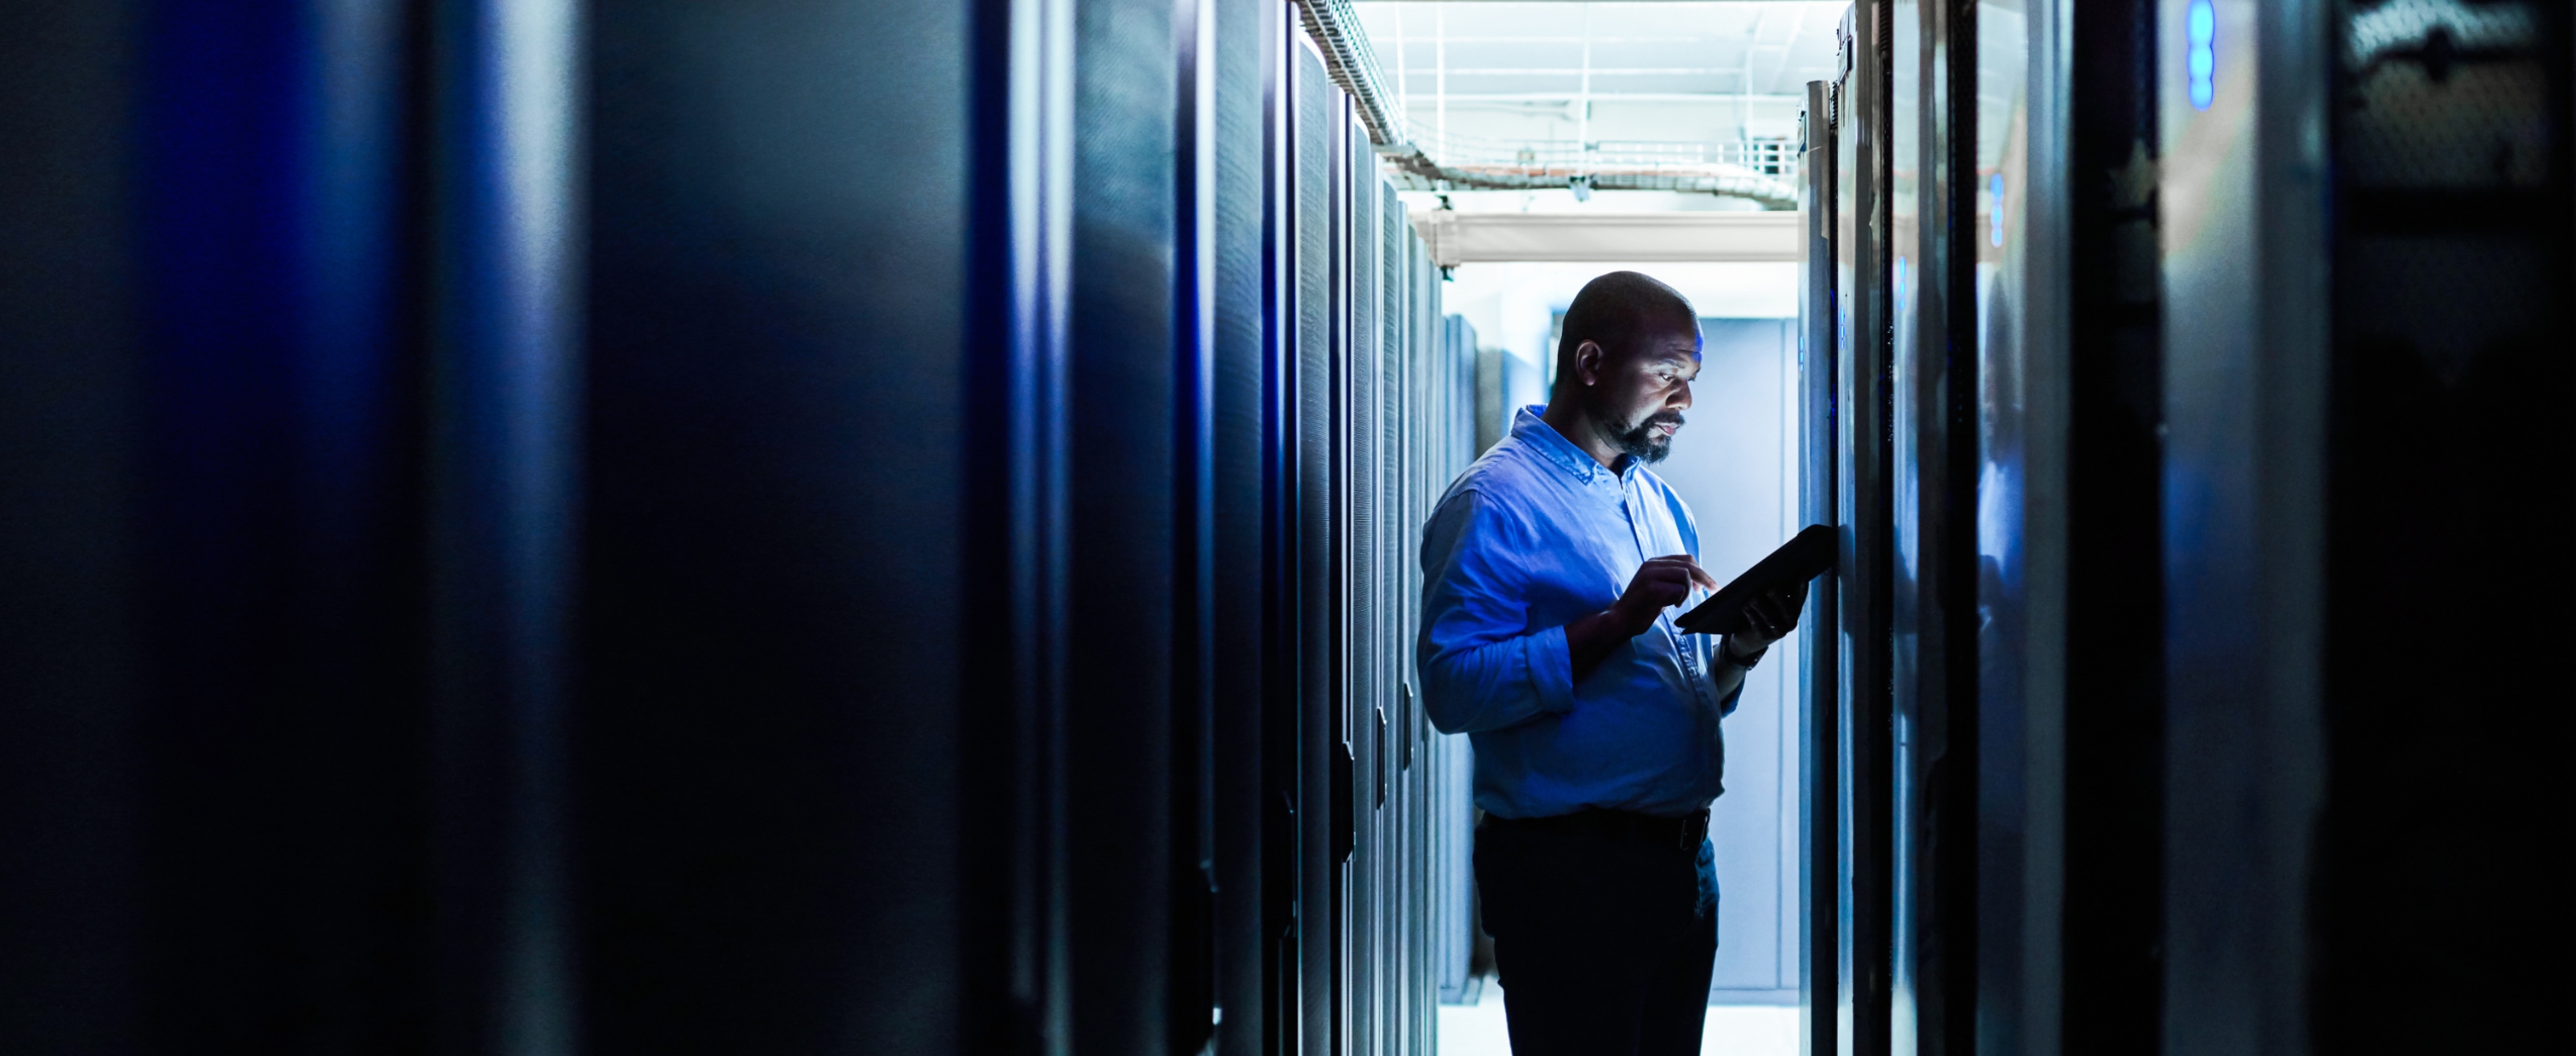 IT worker walking through the enterprise data center checking network dashboards on a tablet.